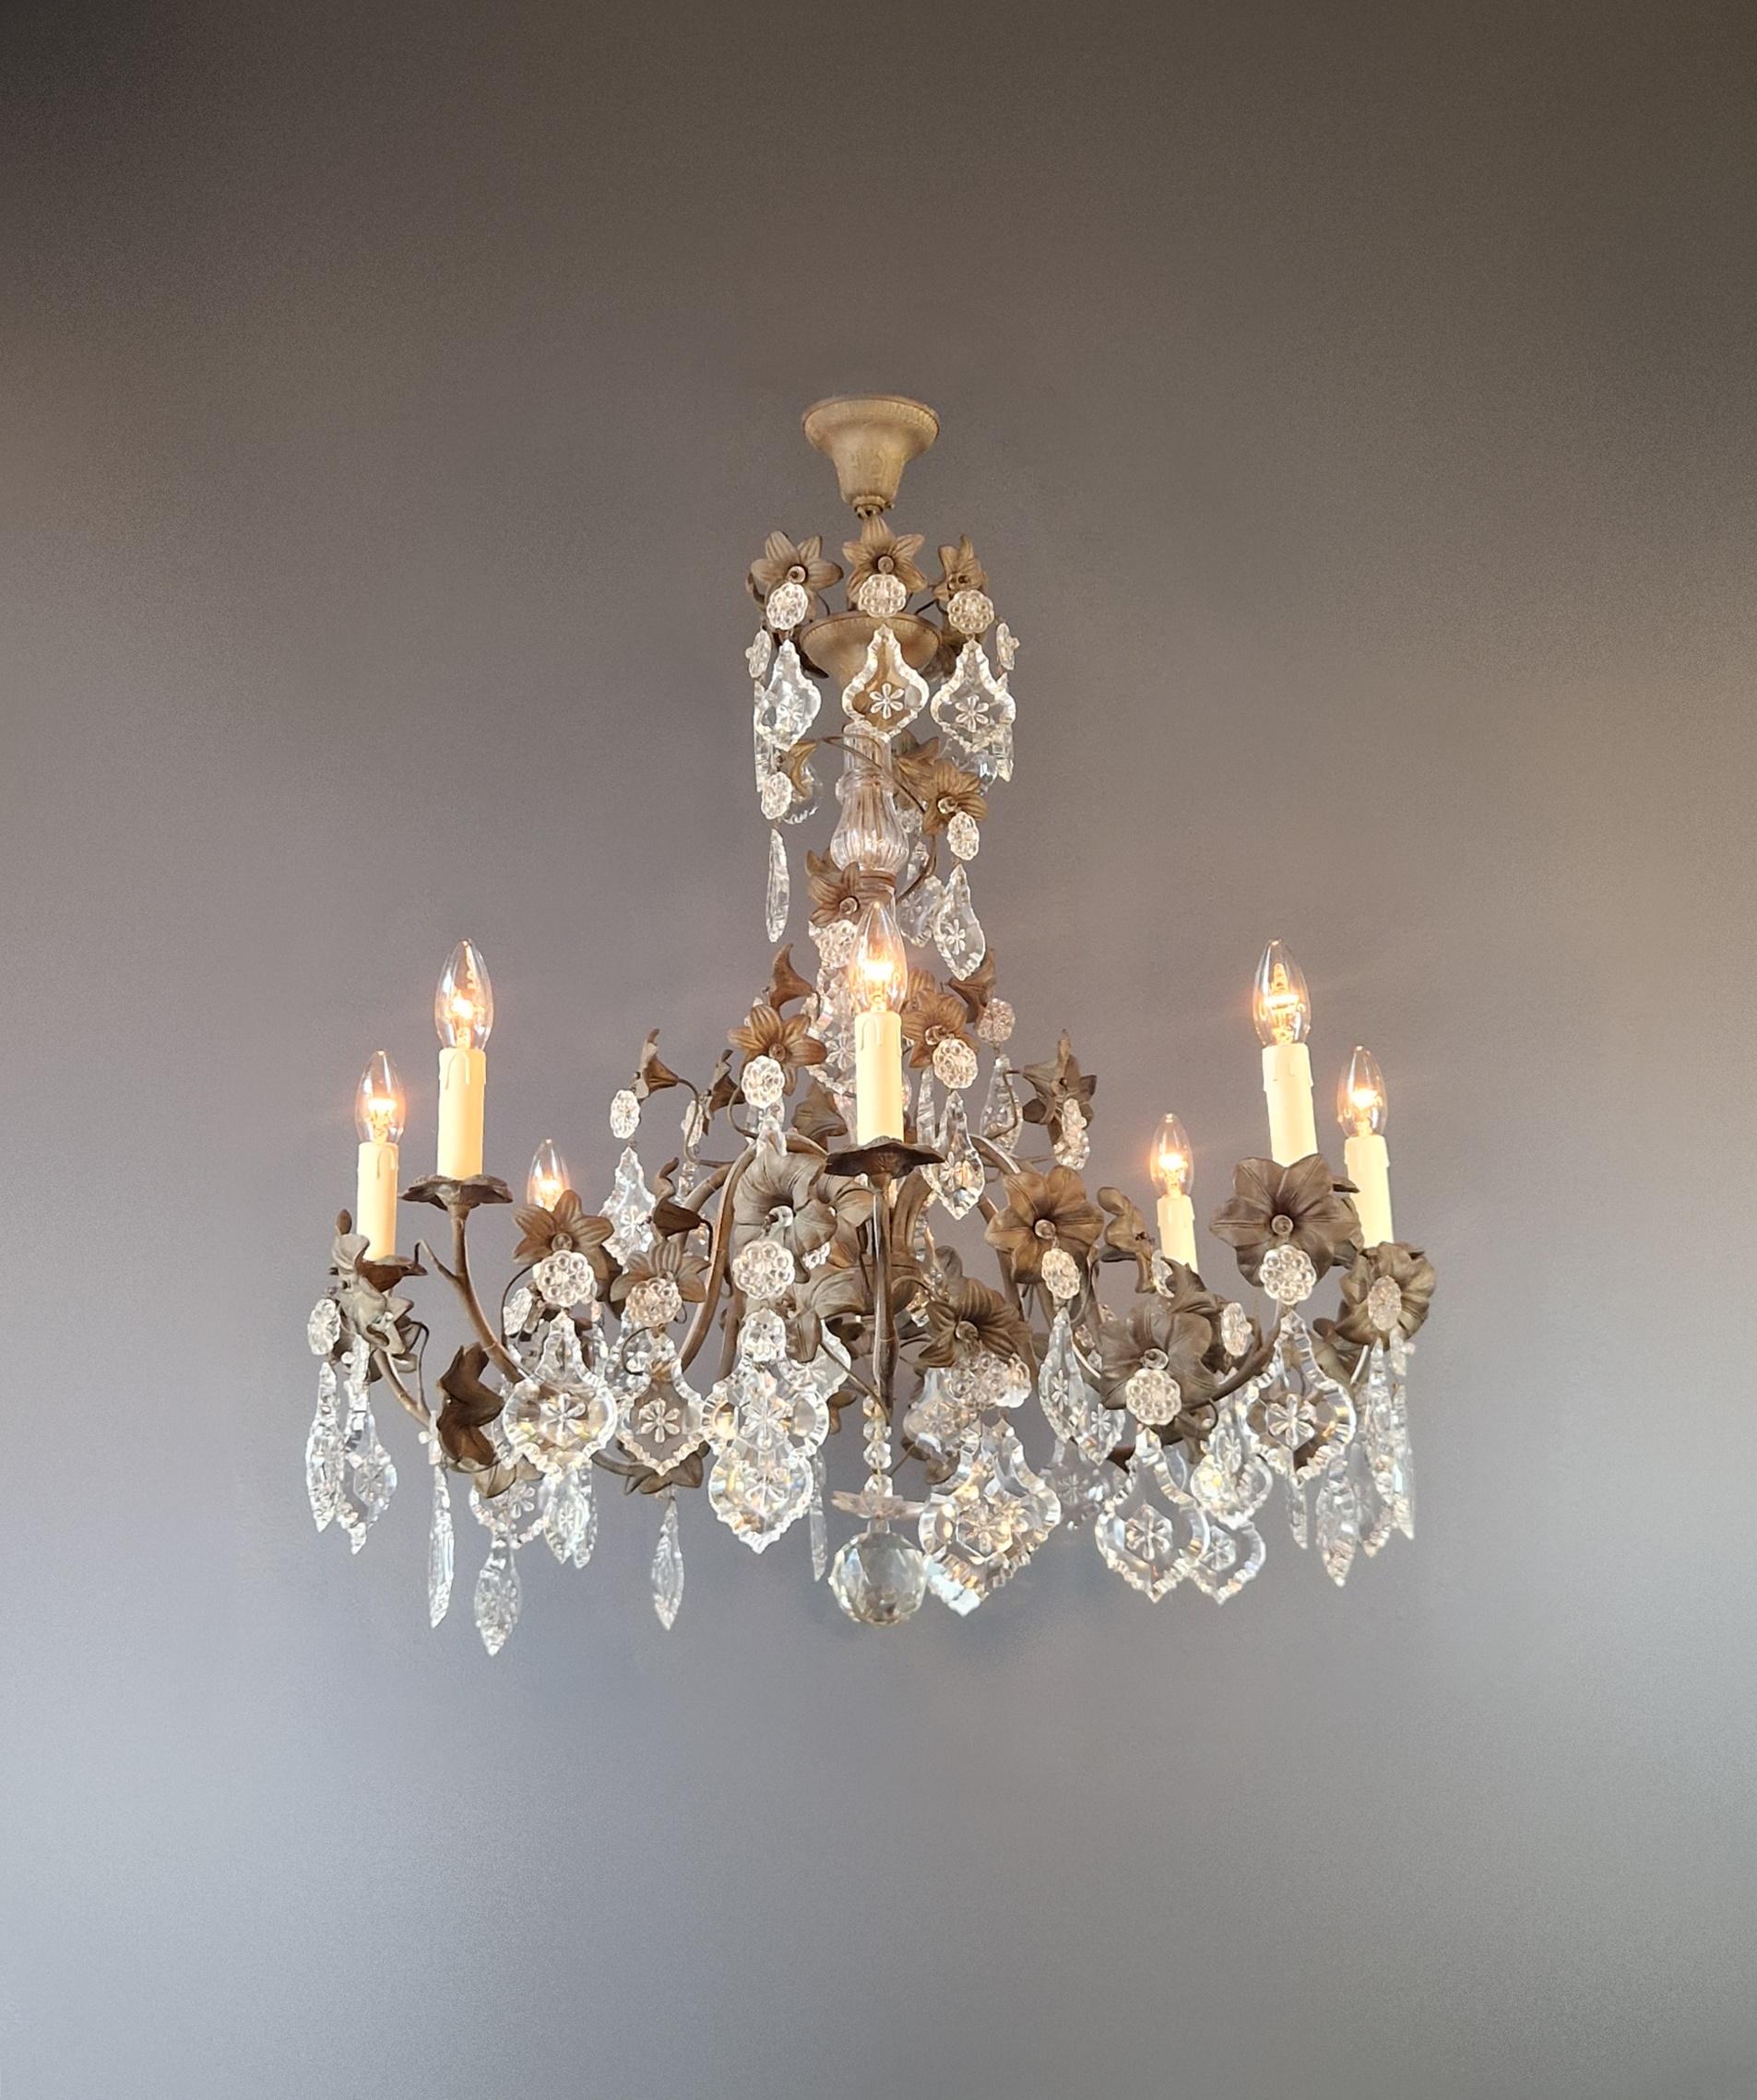 Introducing our Exquisite Antik Chandelier – a masterpiece of elegance and style that seamlessly complements any space with a touch of timeless beauty. With its stunning details and compact dimensions, this chandelier infuses your home with a touch